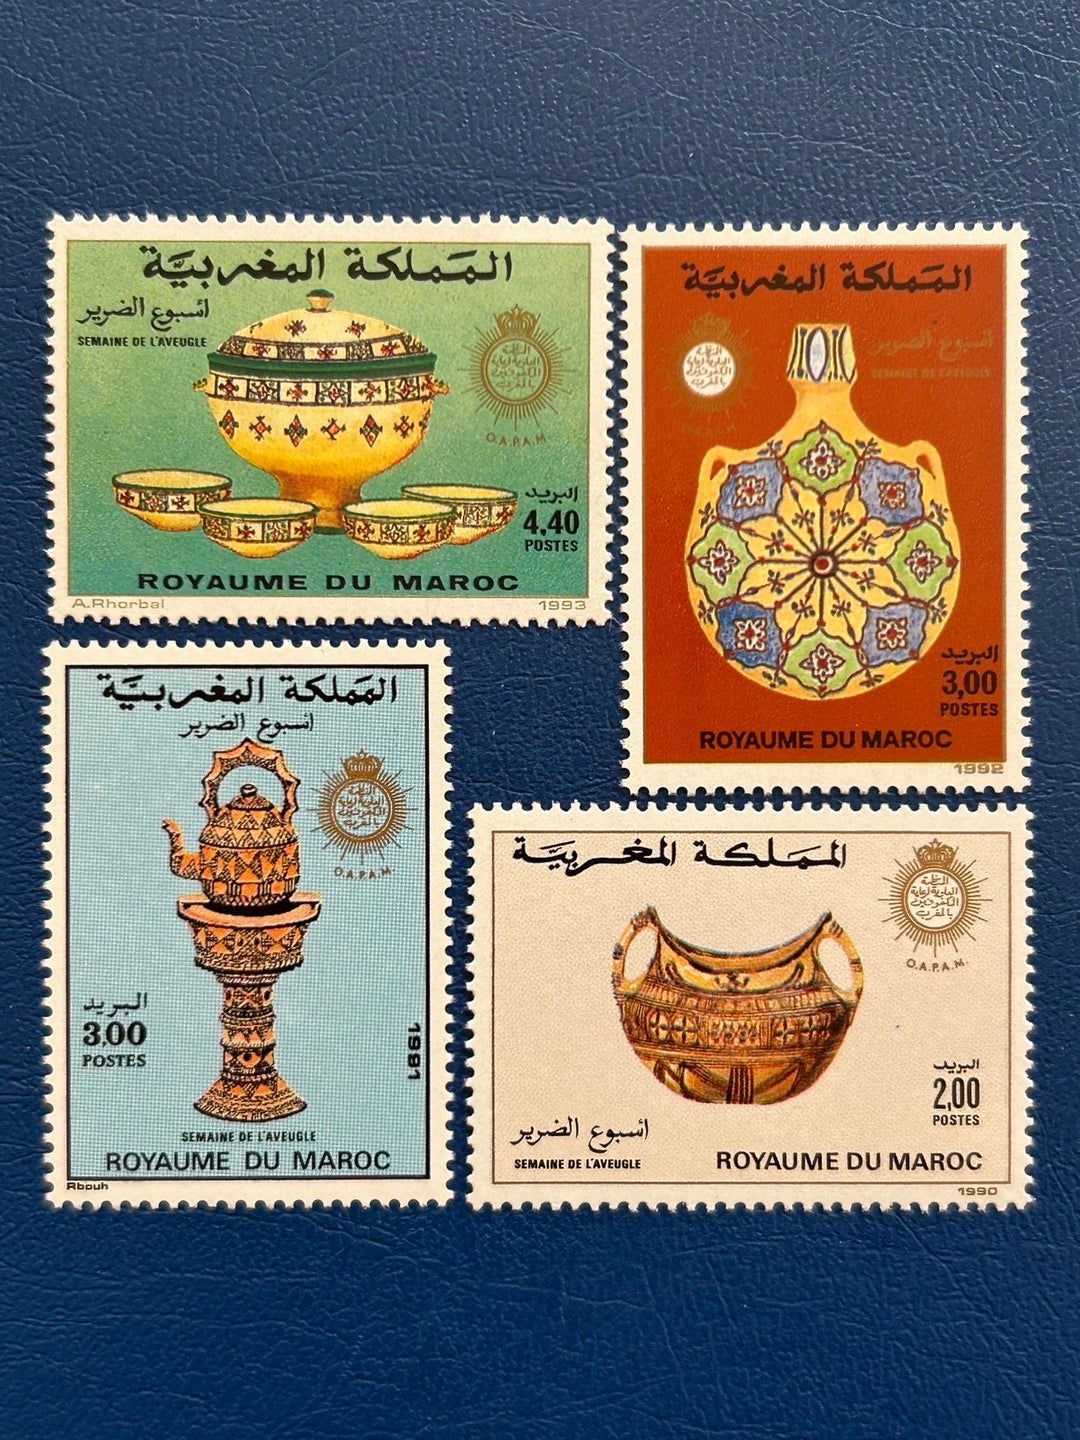 Morocco - Original Vintage Postage Stamps- 1990-93 - Week of the Blind: Handicrafts -for the collector, artist or crafter